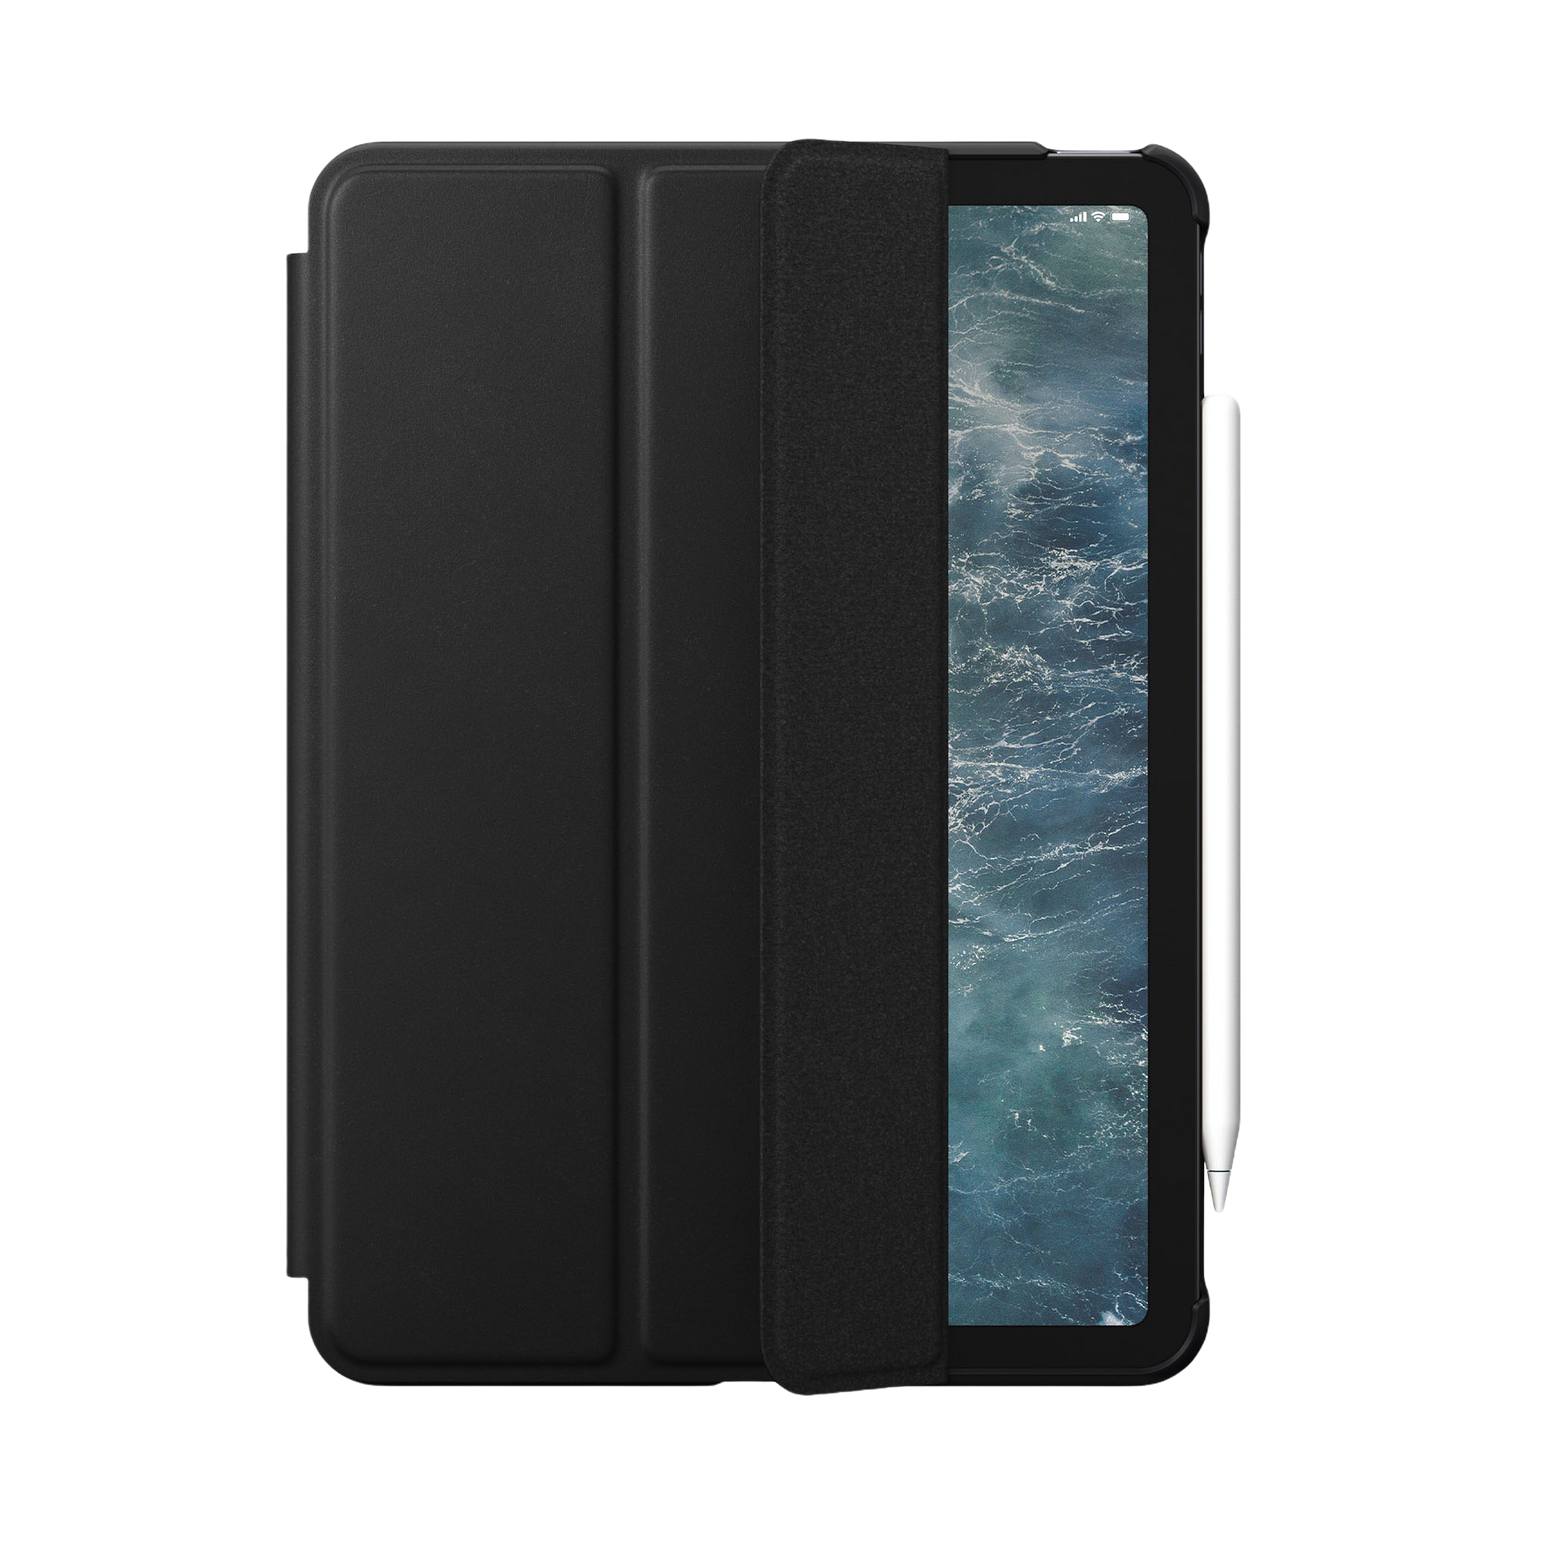 Nomad Modern Leather Folio for iPad Air (4th Gen) - Black - Discontinued